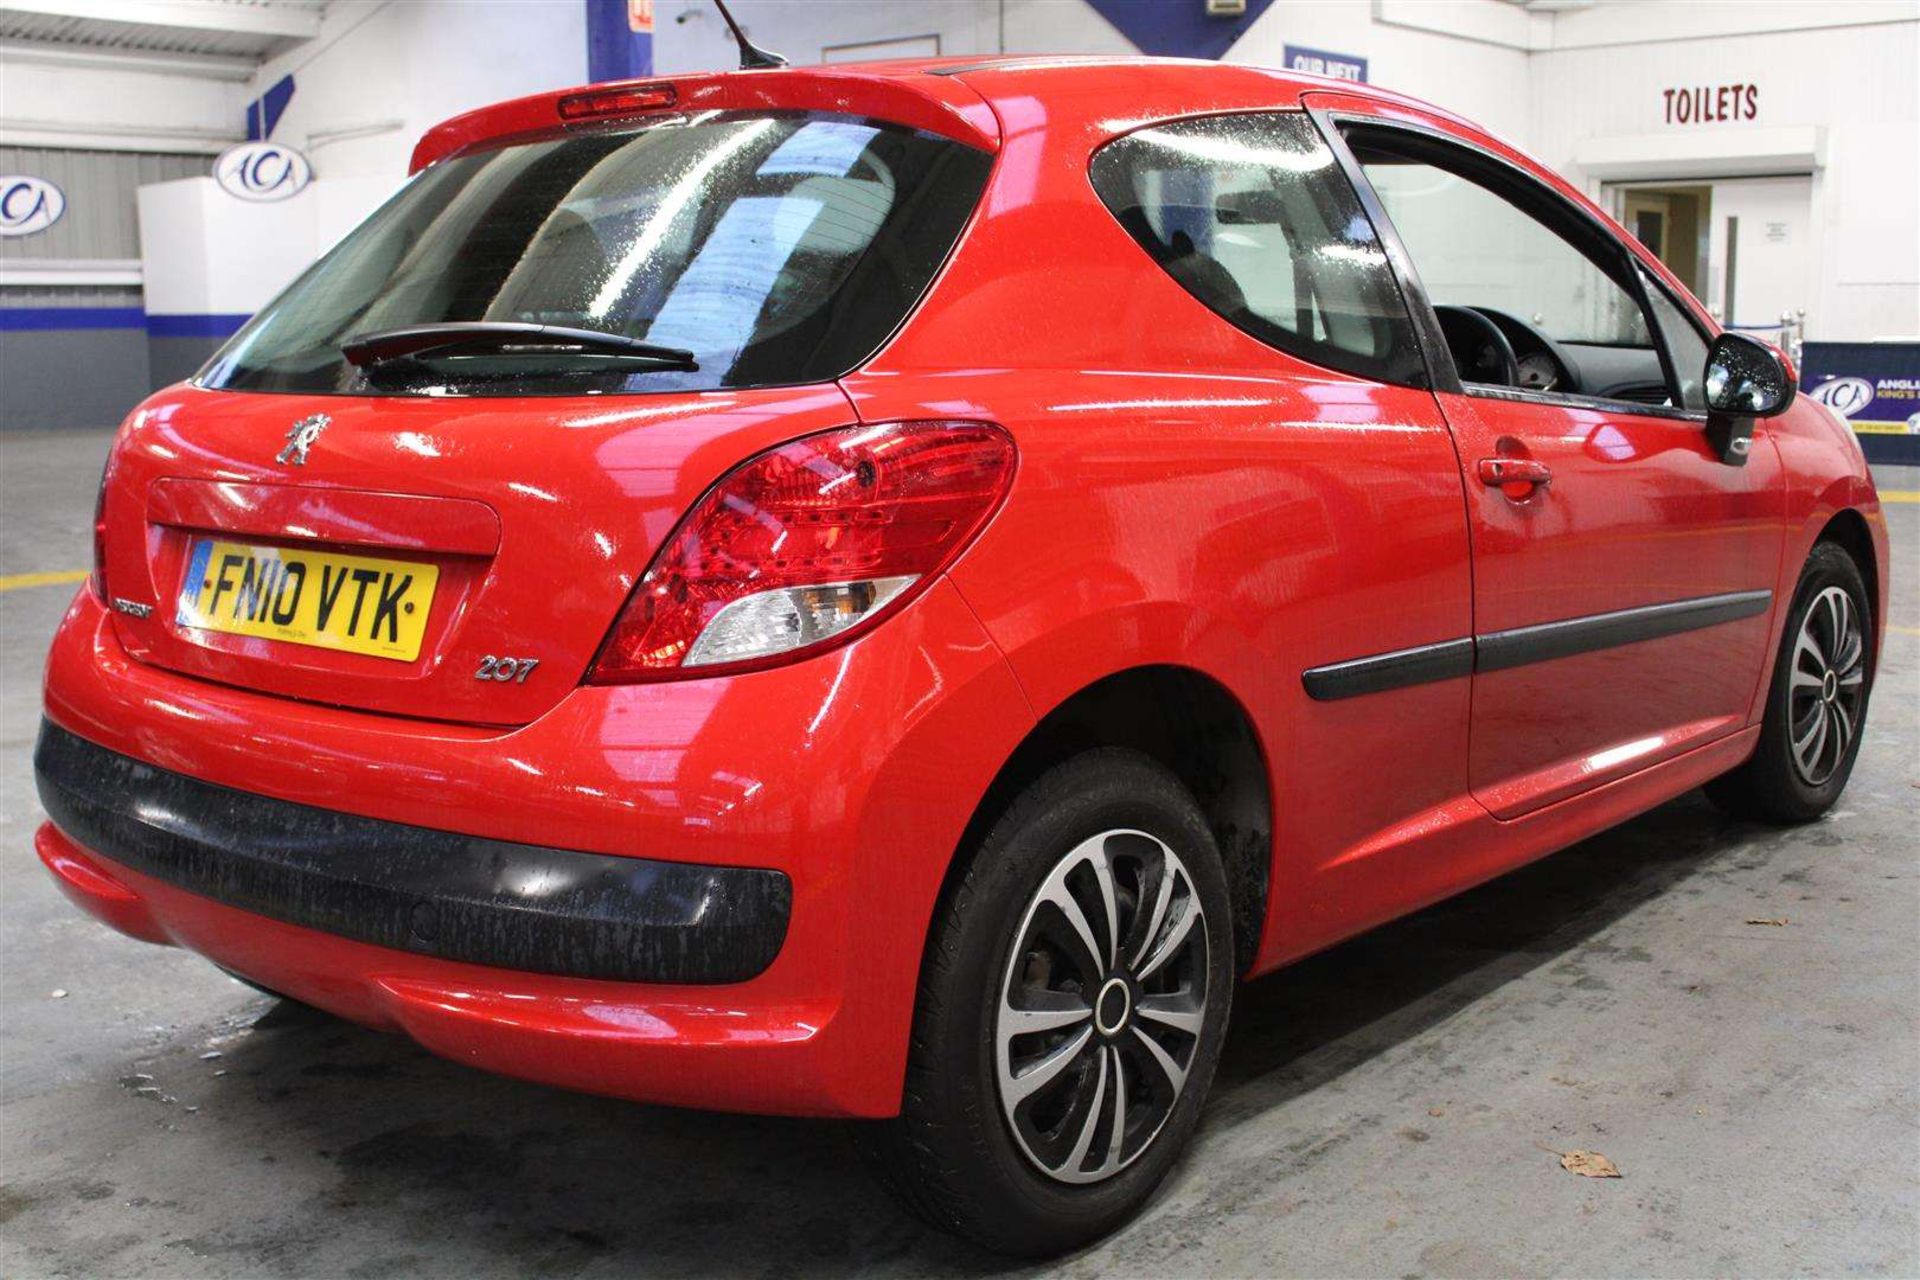 2010 PEUGEOT 207 S - Image 8 of 24